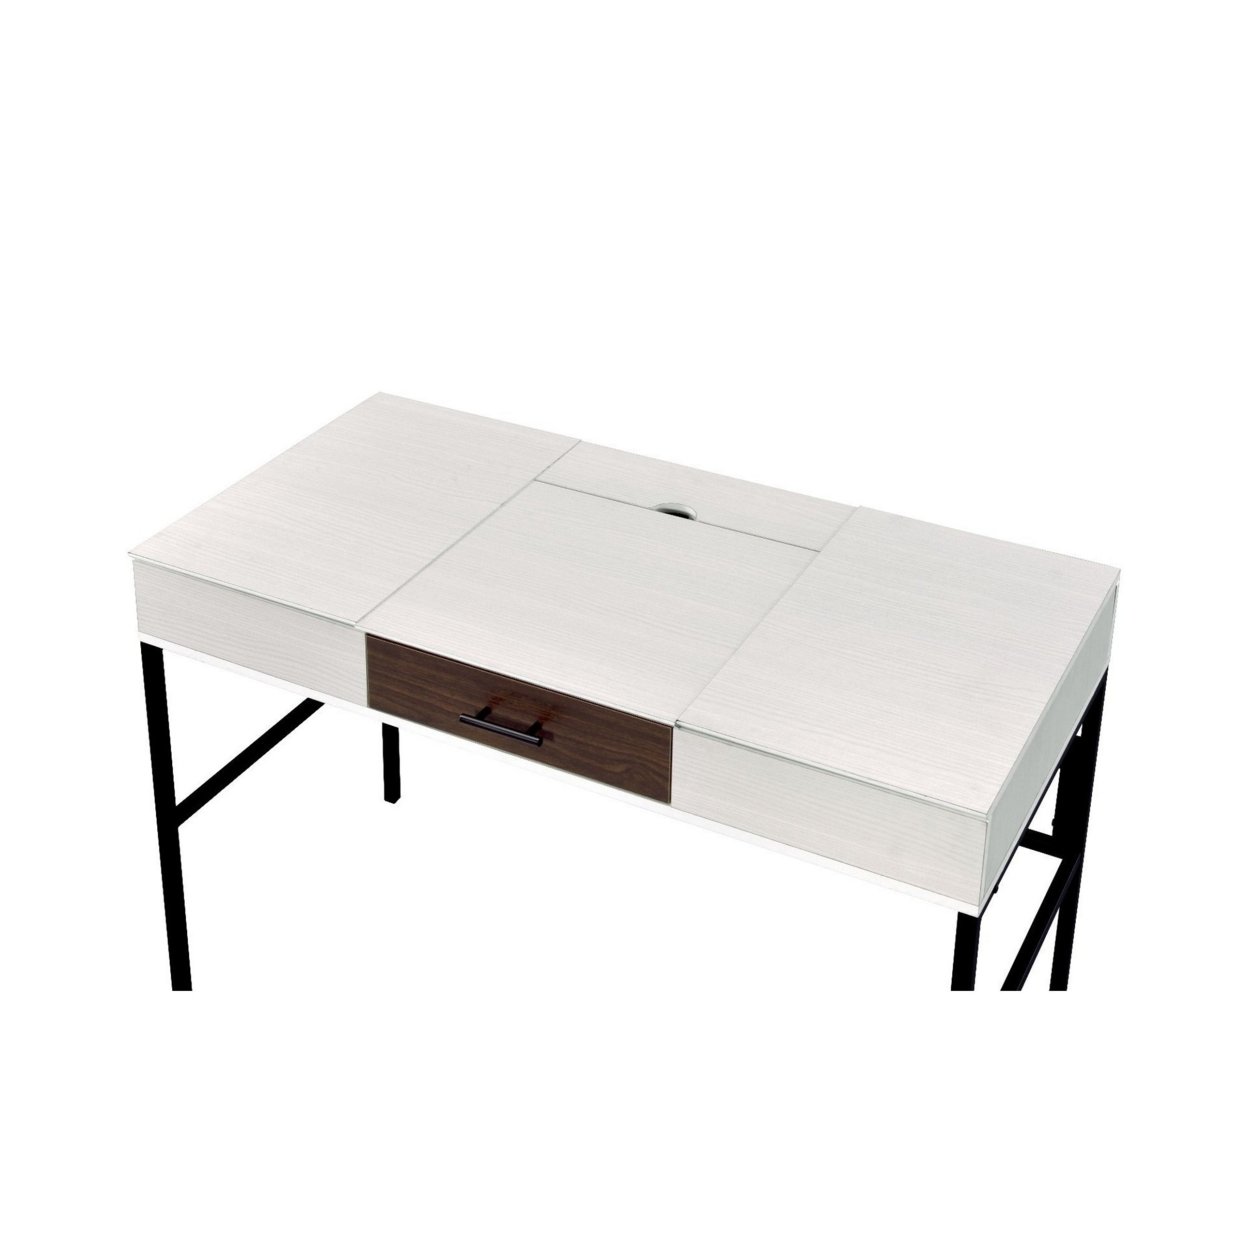 Writing Desk With 2 Hinged Top Storage Compartments, White And Black- Saltoro Sherpi